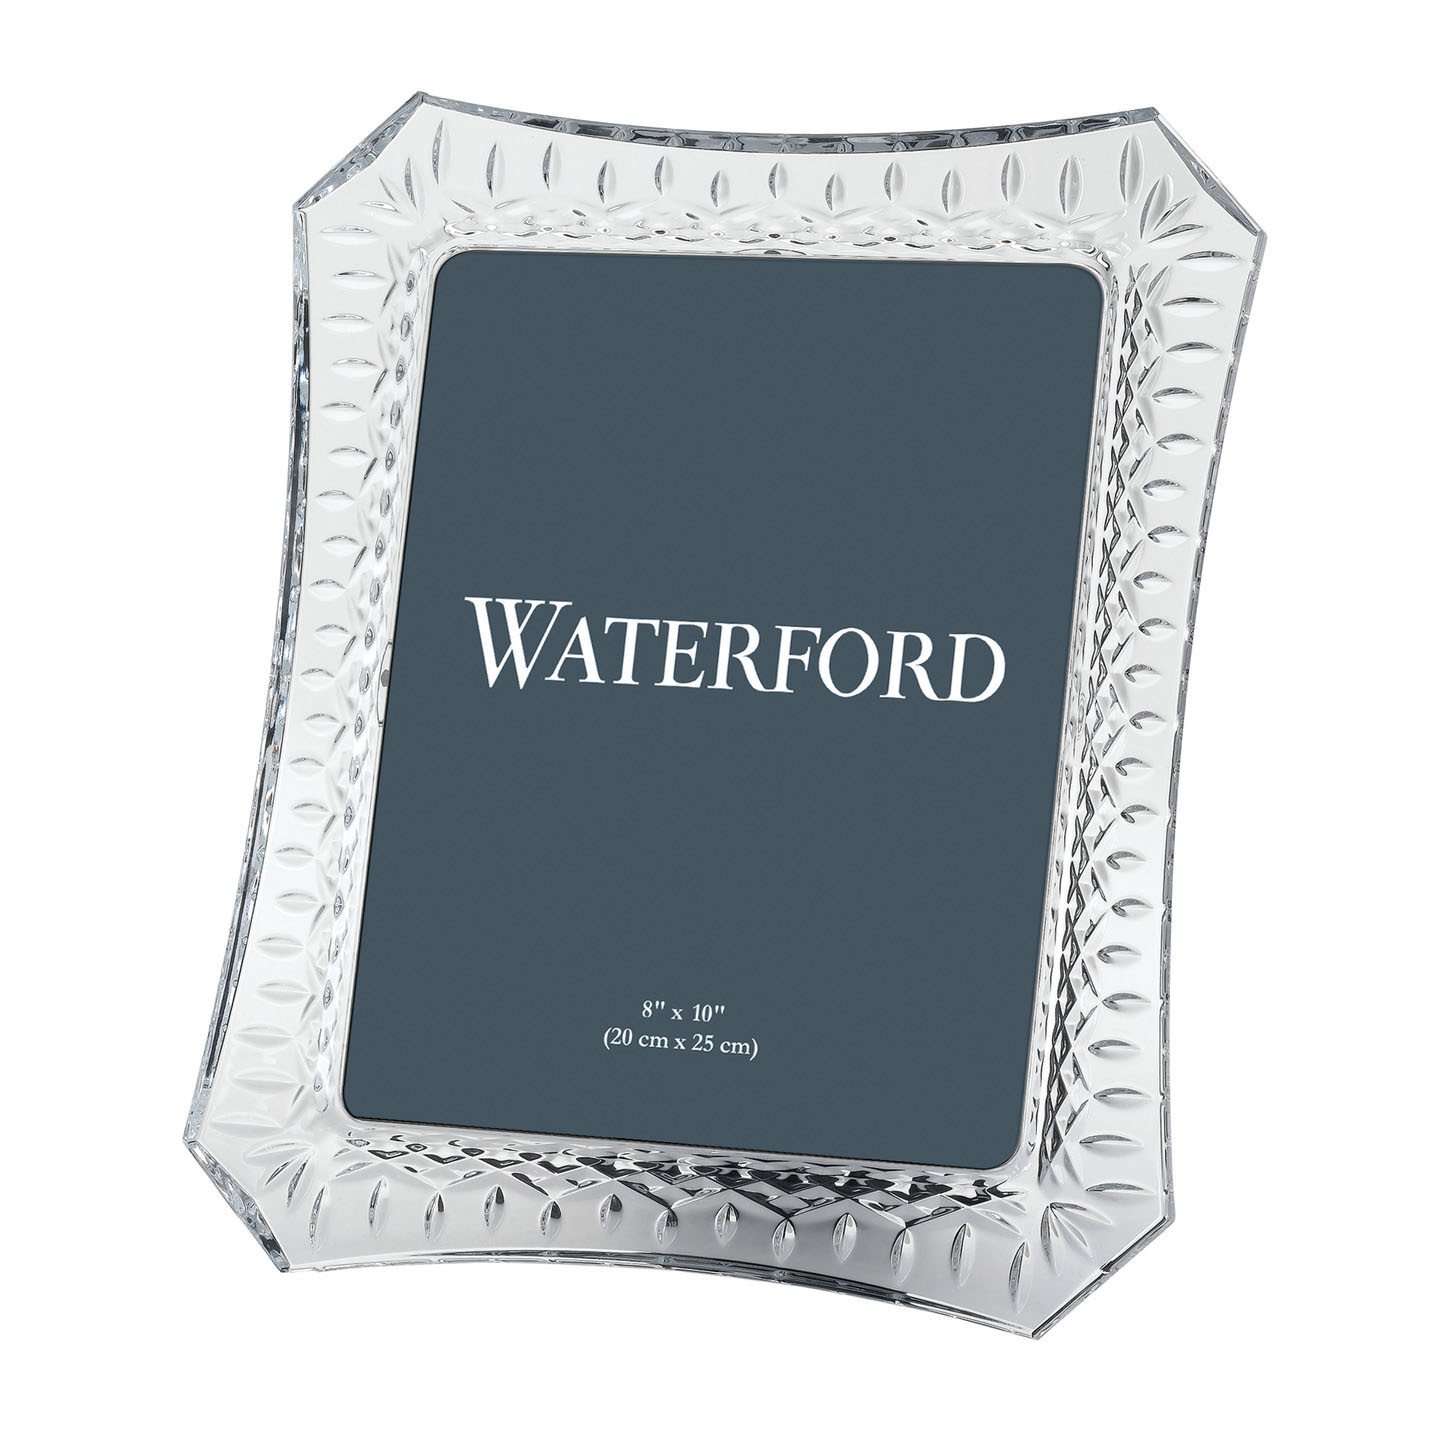 29 Great Waterford Sugar Bud Vase 2024 free download waterford sugar bud vase of lismore collection home gifts waterforda crystal intended for lismore photo frame photo 8x10inch